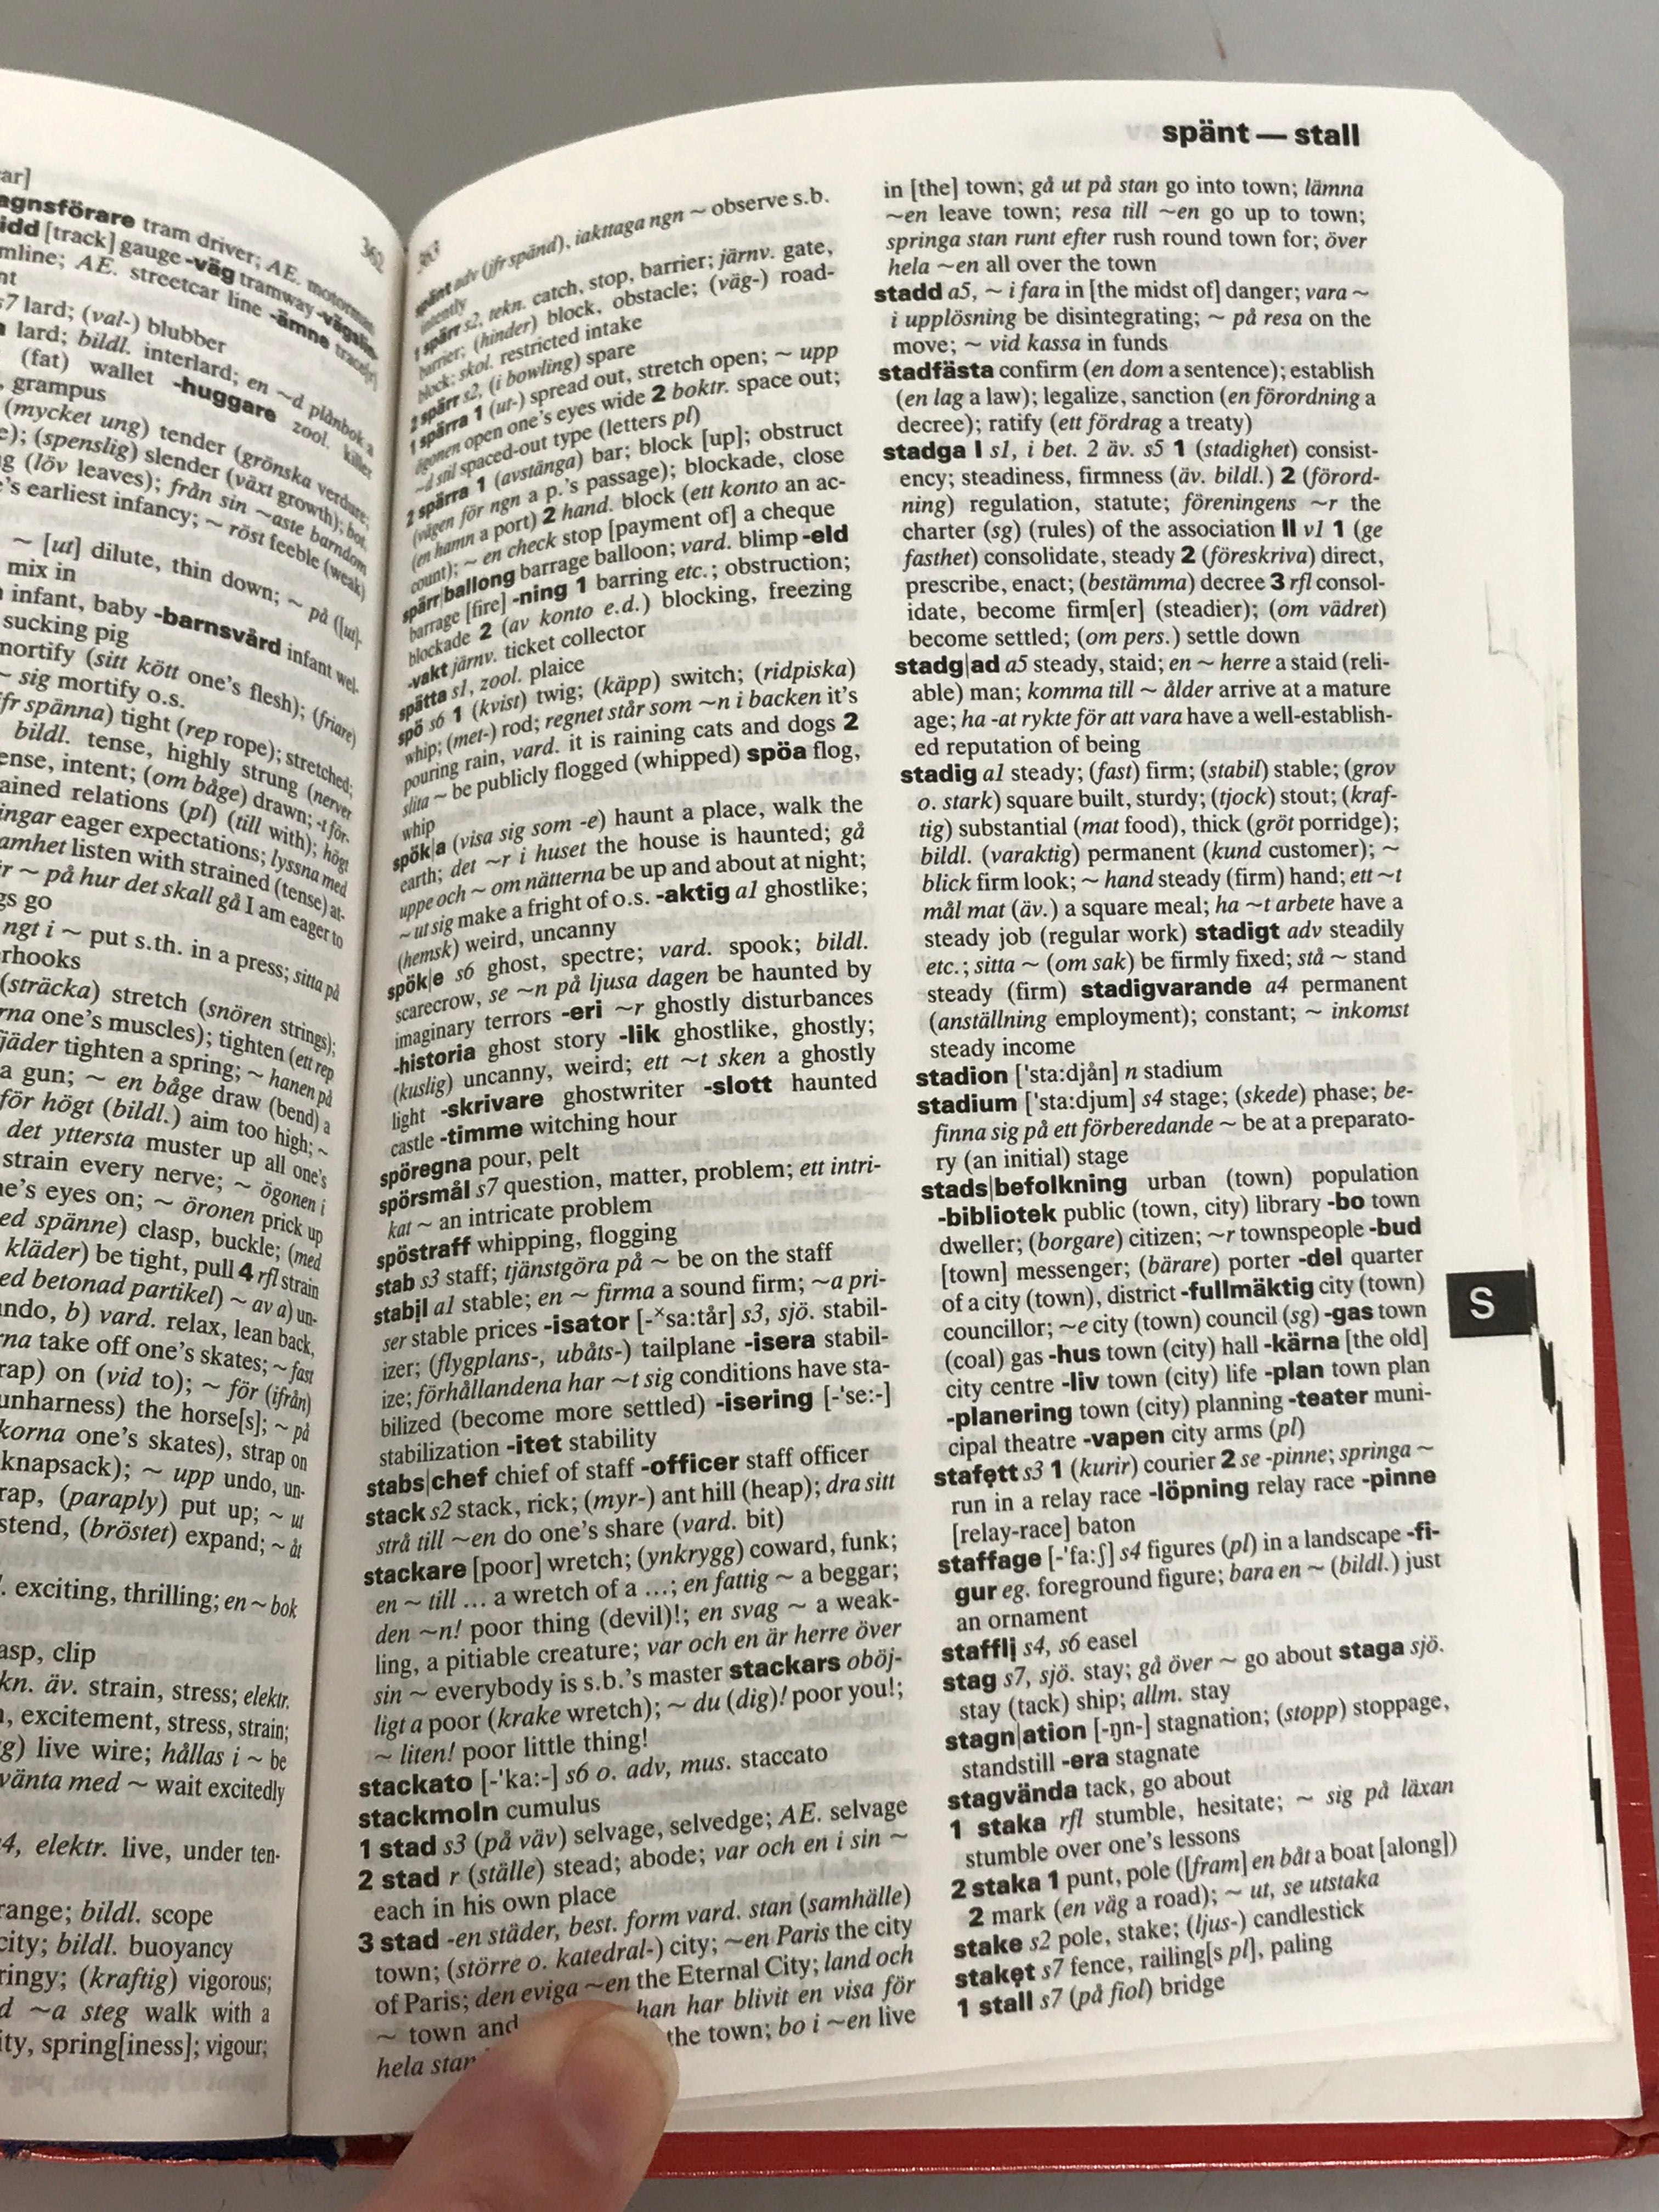 Lot of 2 Swedish Dictionaries: A Swedish-English Dictionary (1995) and The Music Dictionary (1975) HC